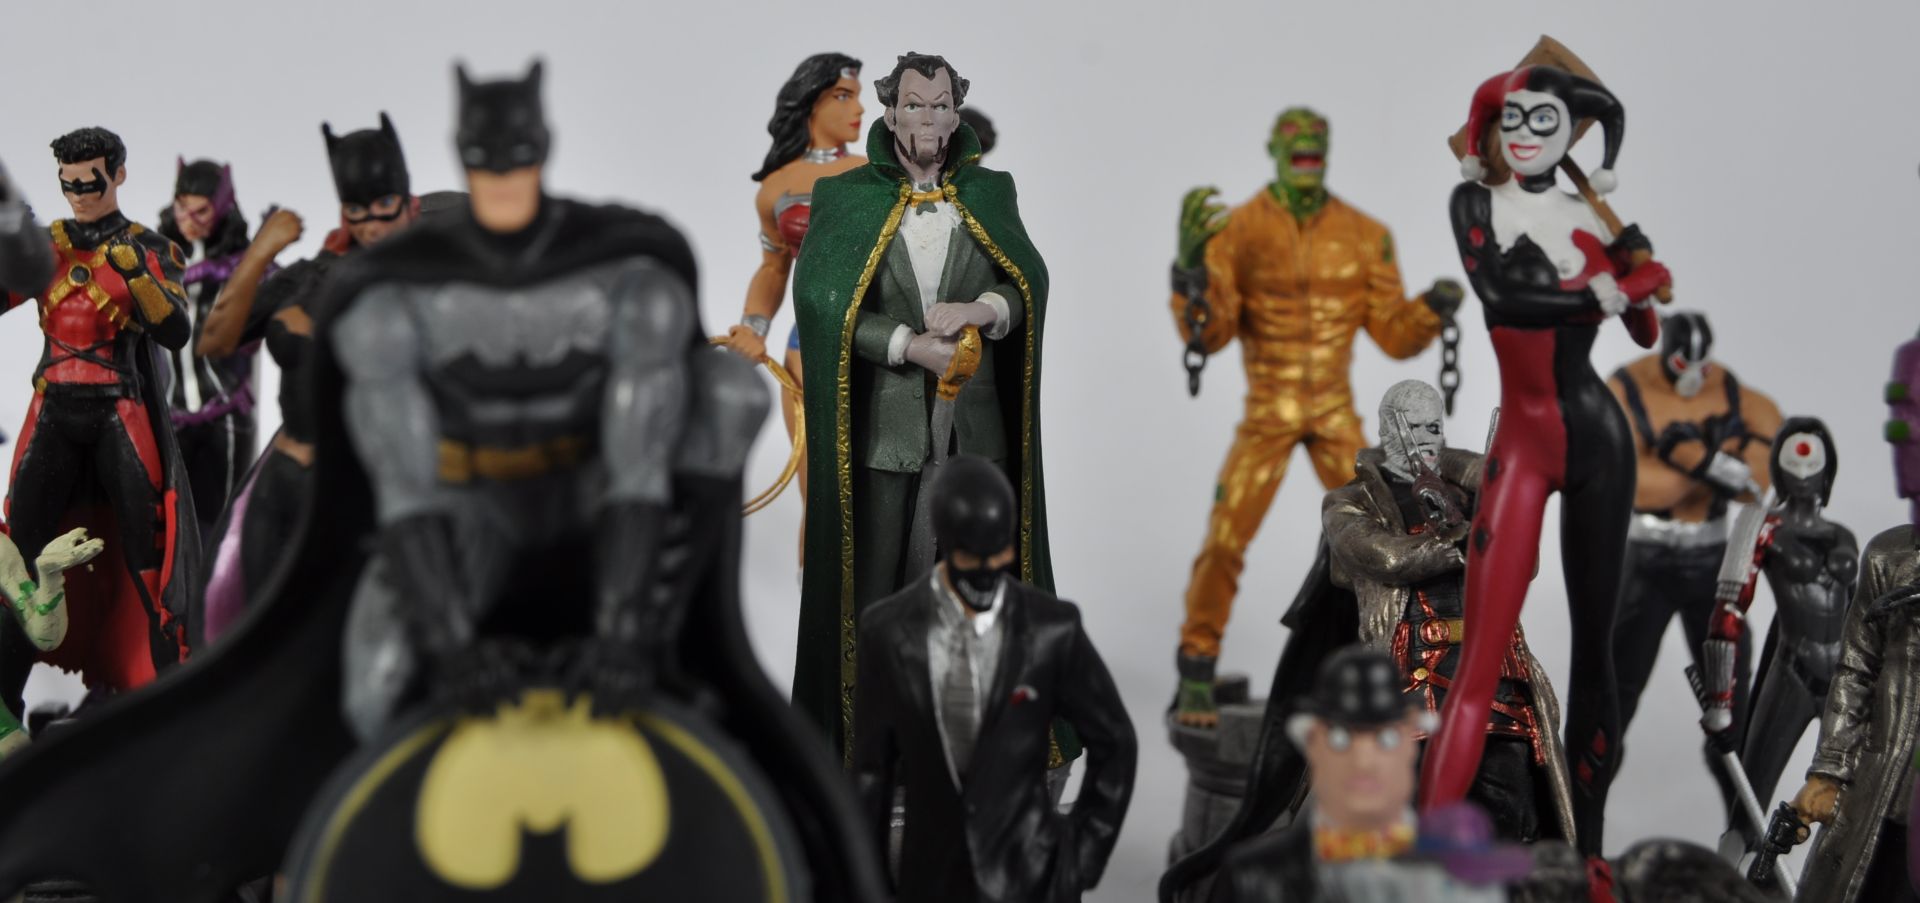 A COLLECTION OF DC COMIC RELATED EAGLEMOSS FIGURES - Image 7 of 8